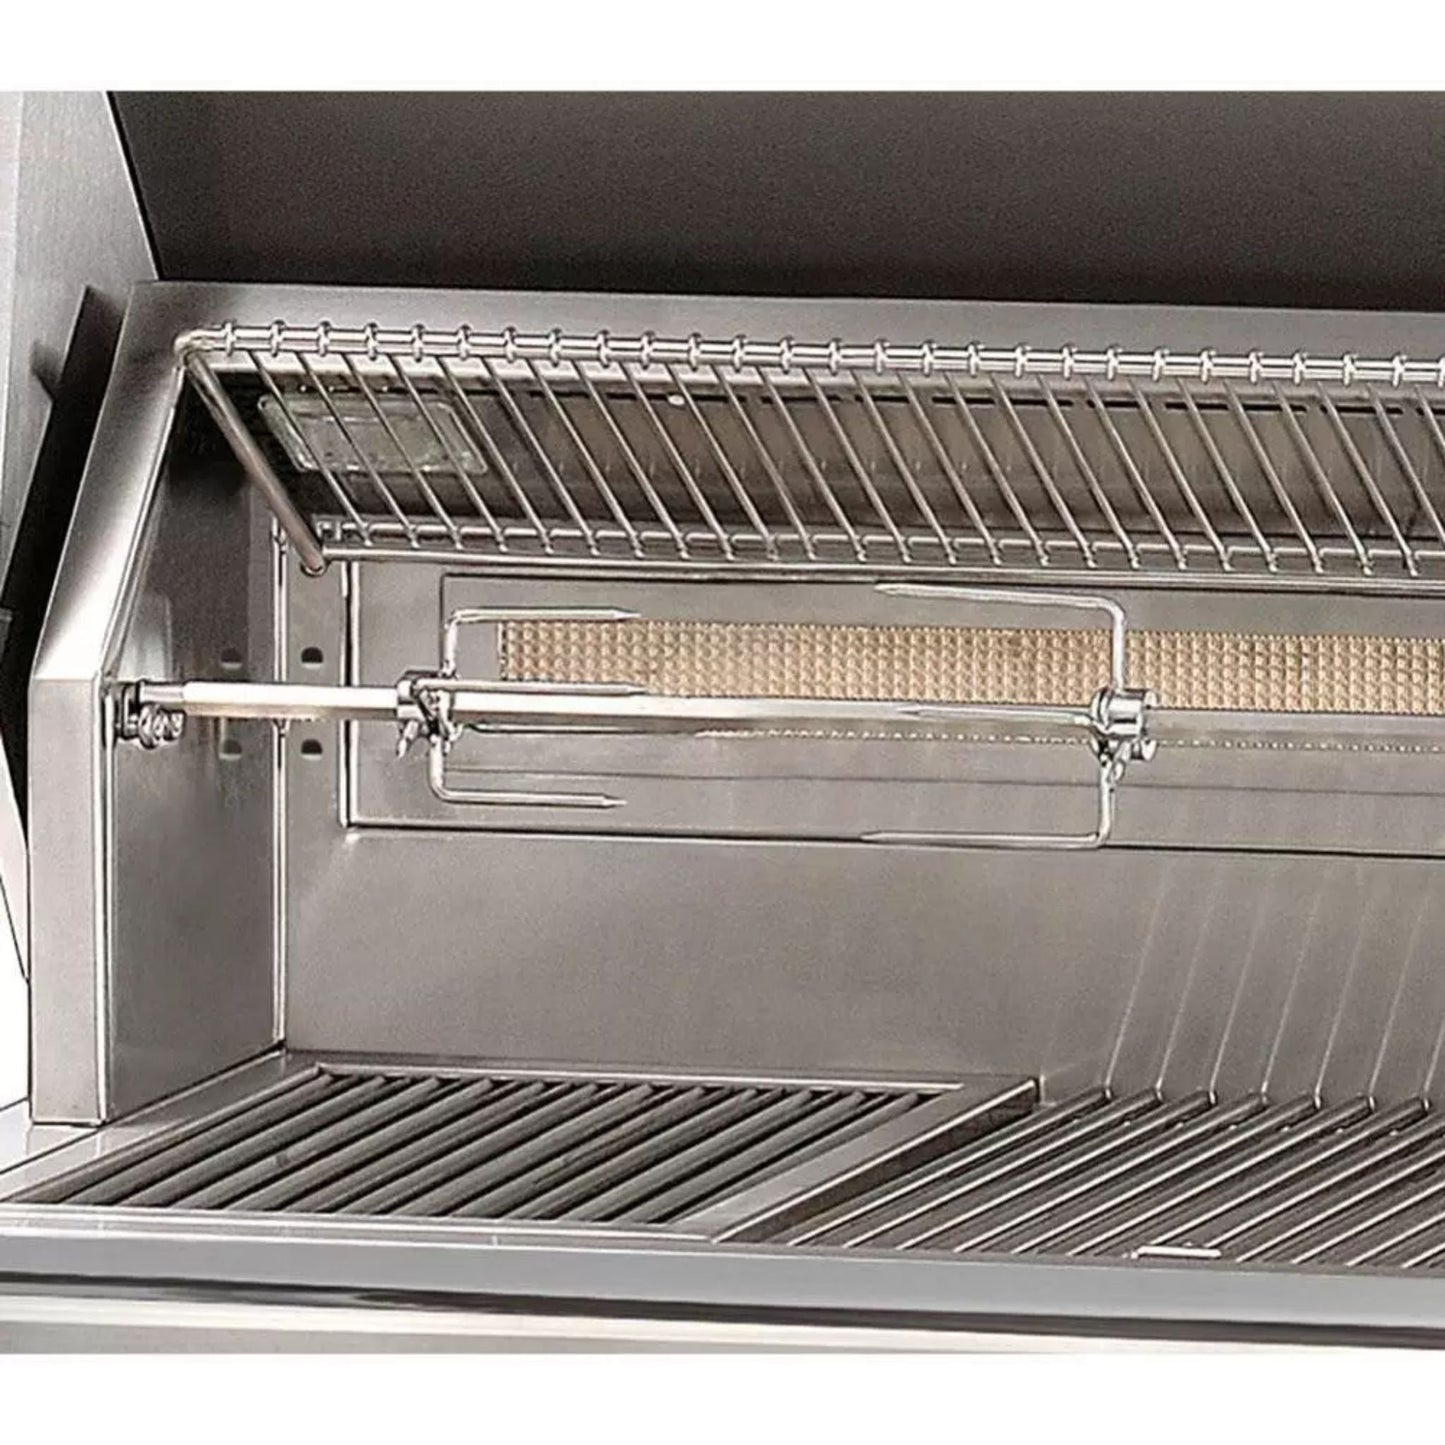 Alfresco Luxury 42" Stainless Steel Standard Grill Head 3 Burner Natural Gas Built-In Grill